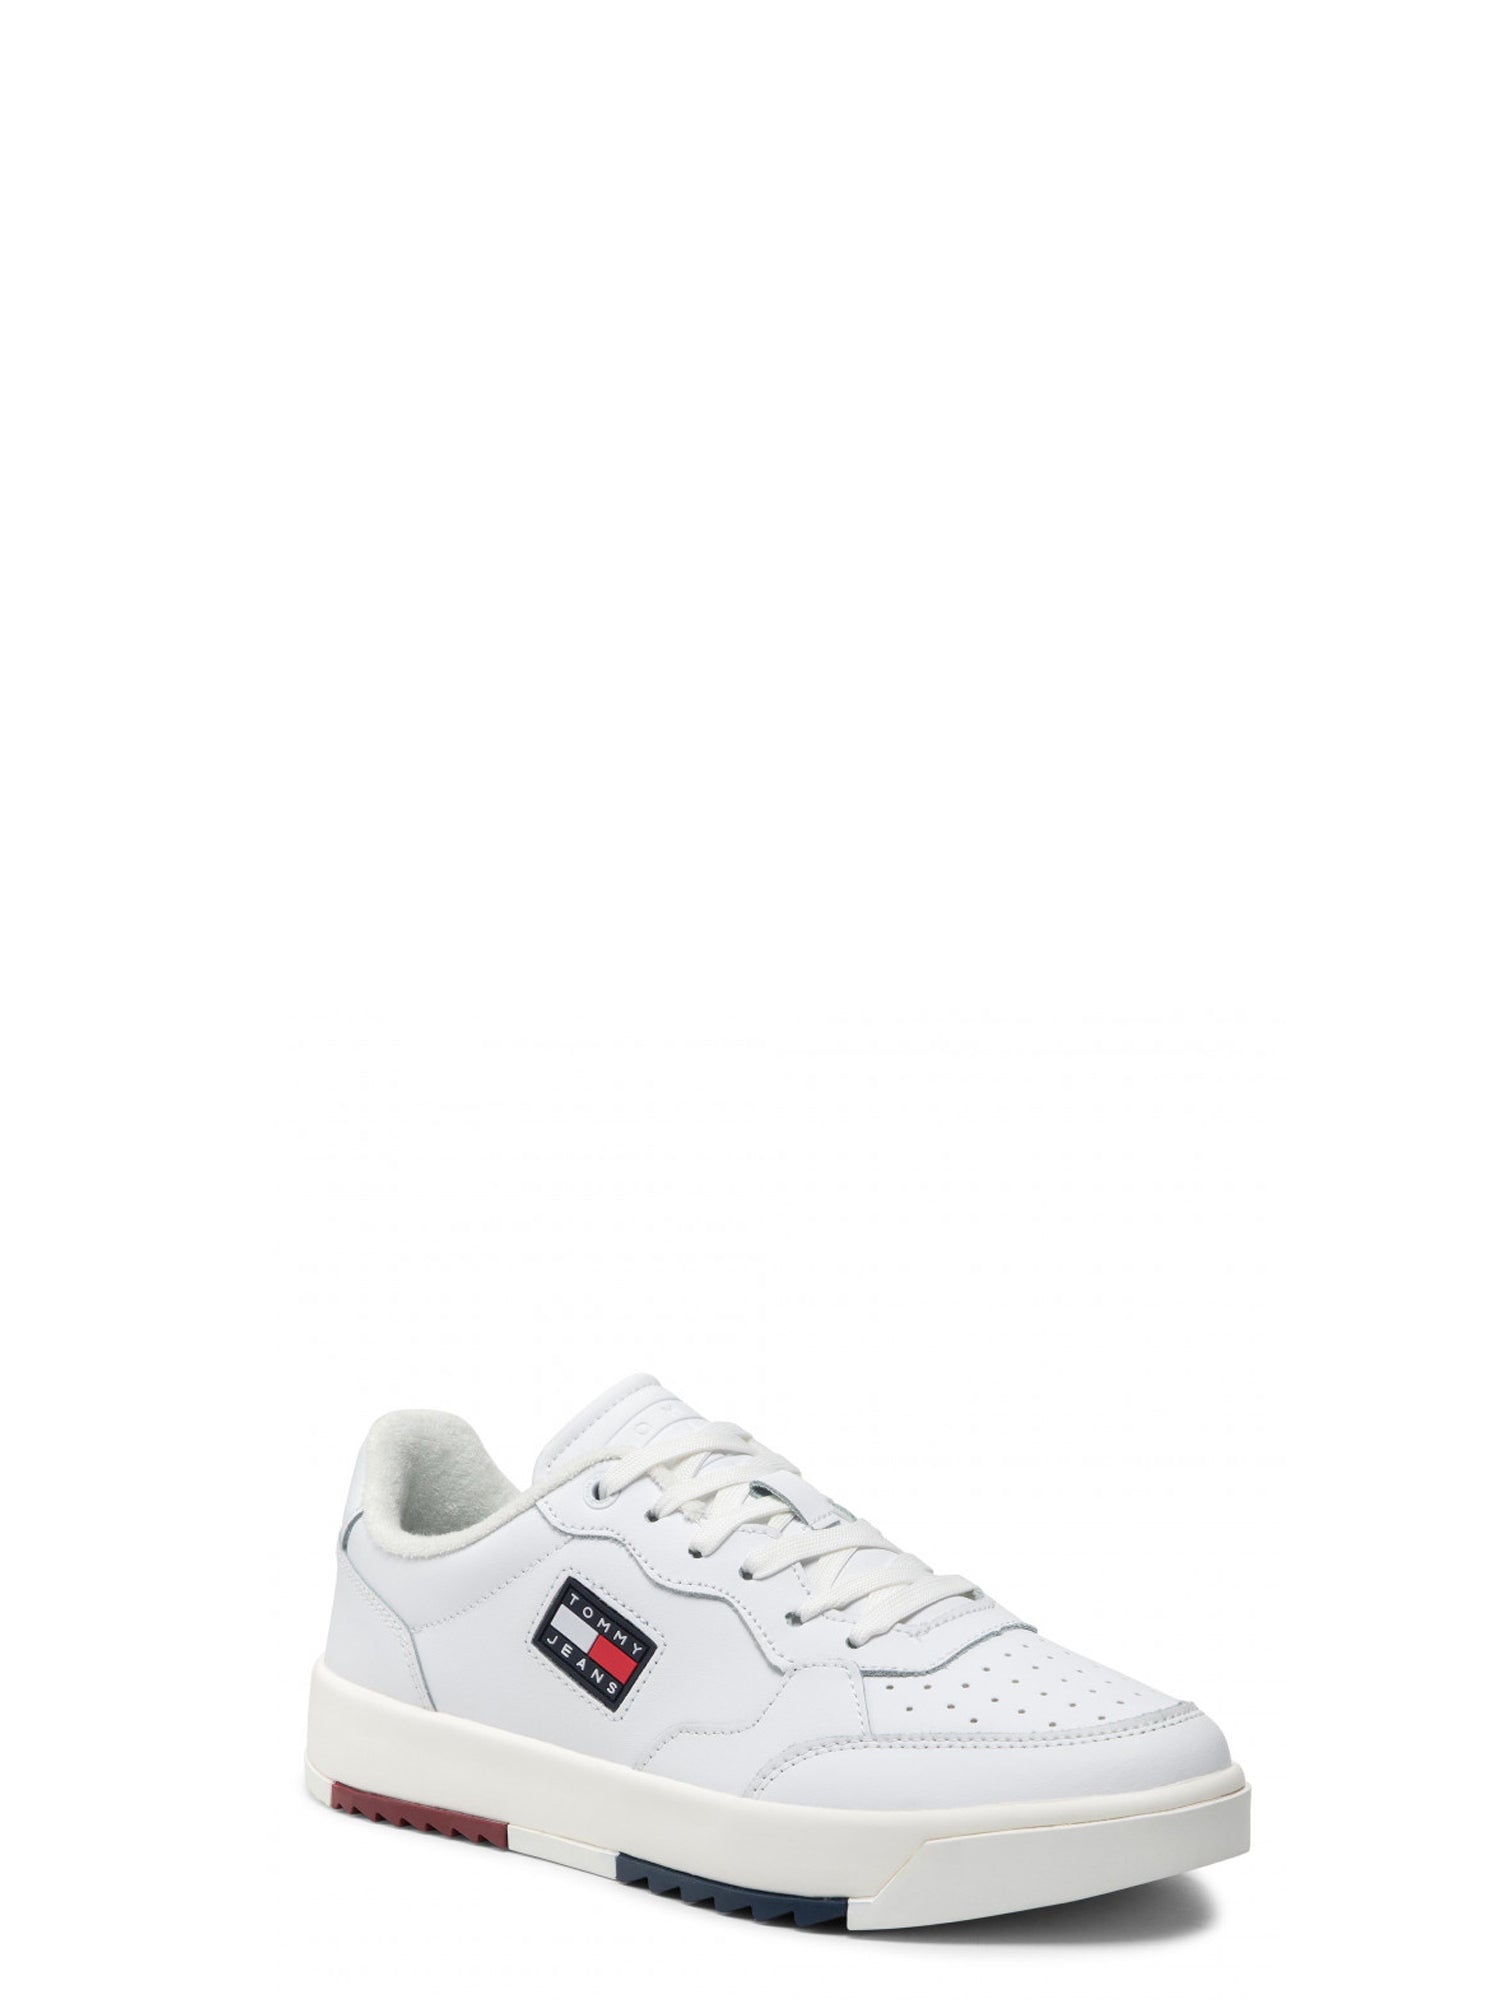 TOMMY HILFIGER SHOES SNEAKERS BASSE BIANCO